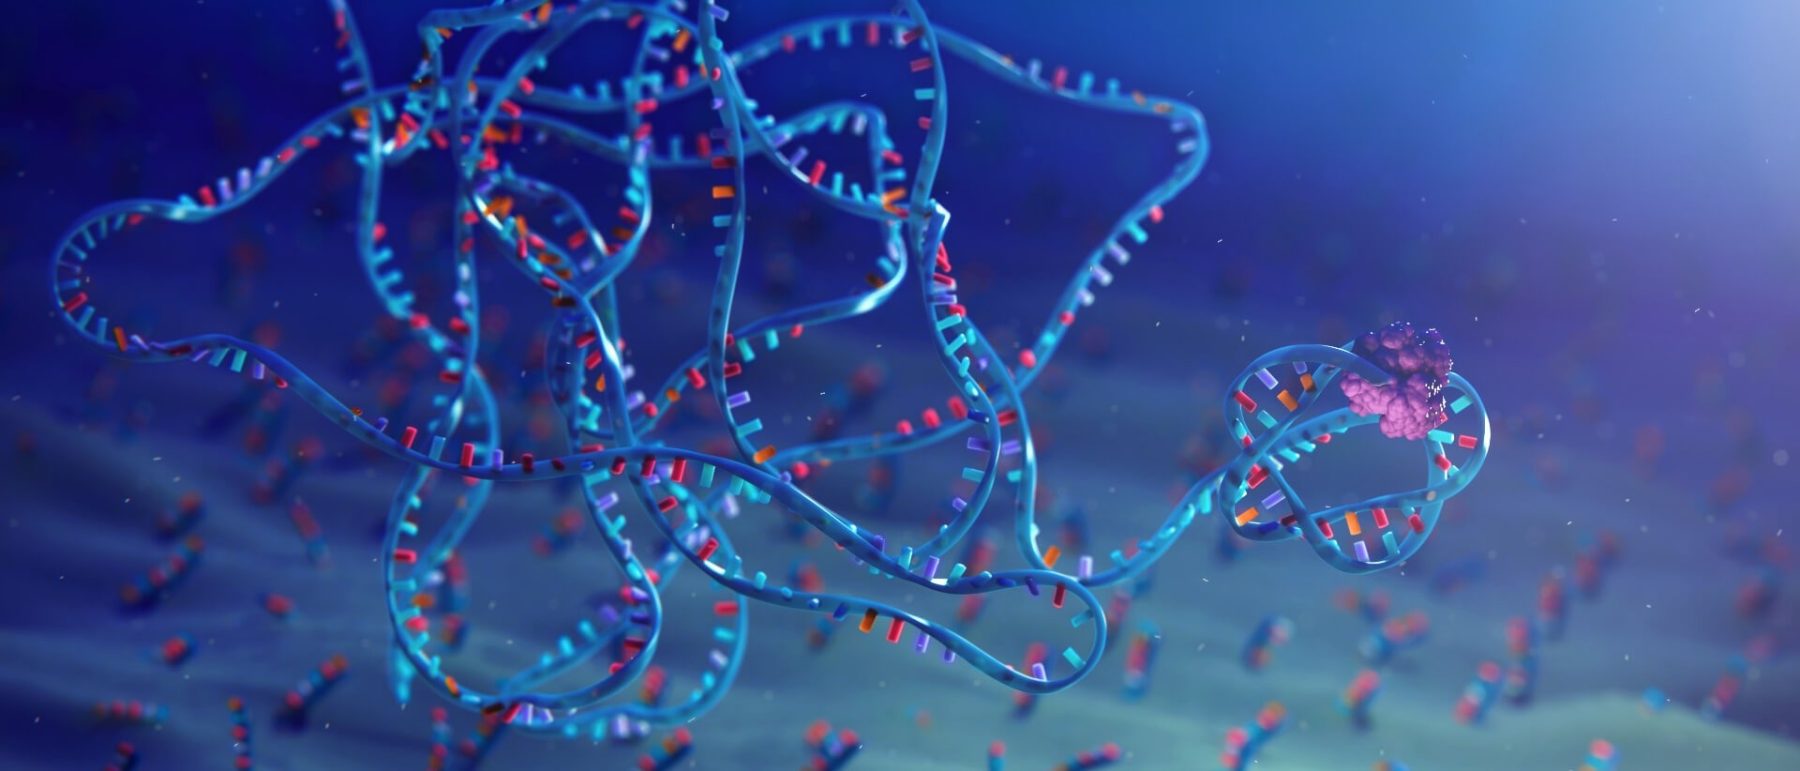 Visualization of Element Biosciences Surface Chemistry DNA Polony